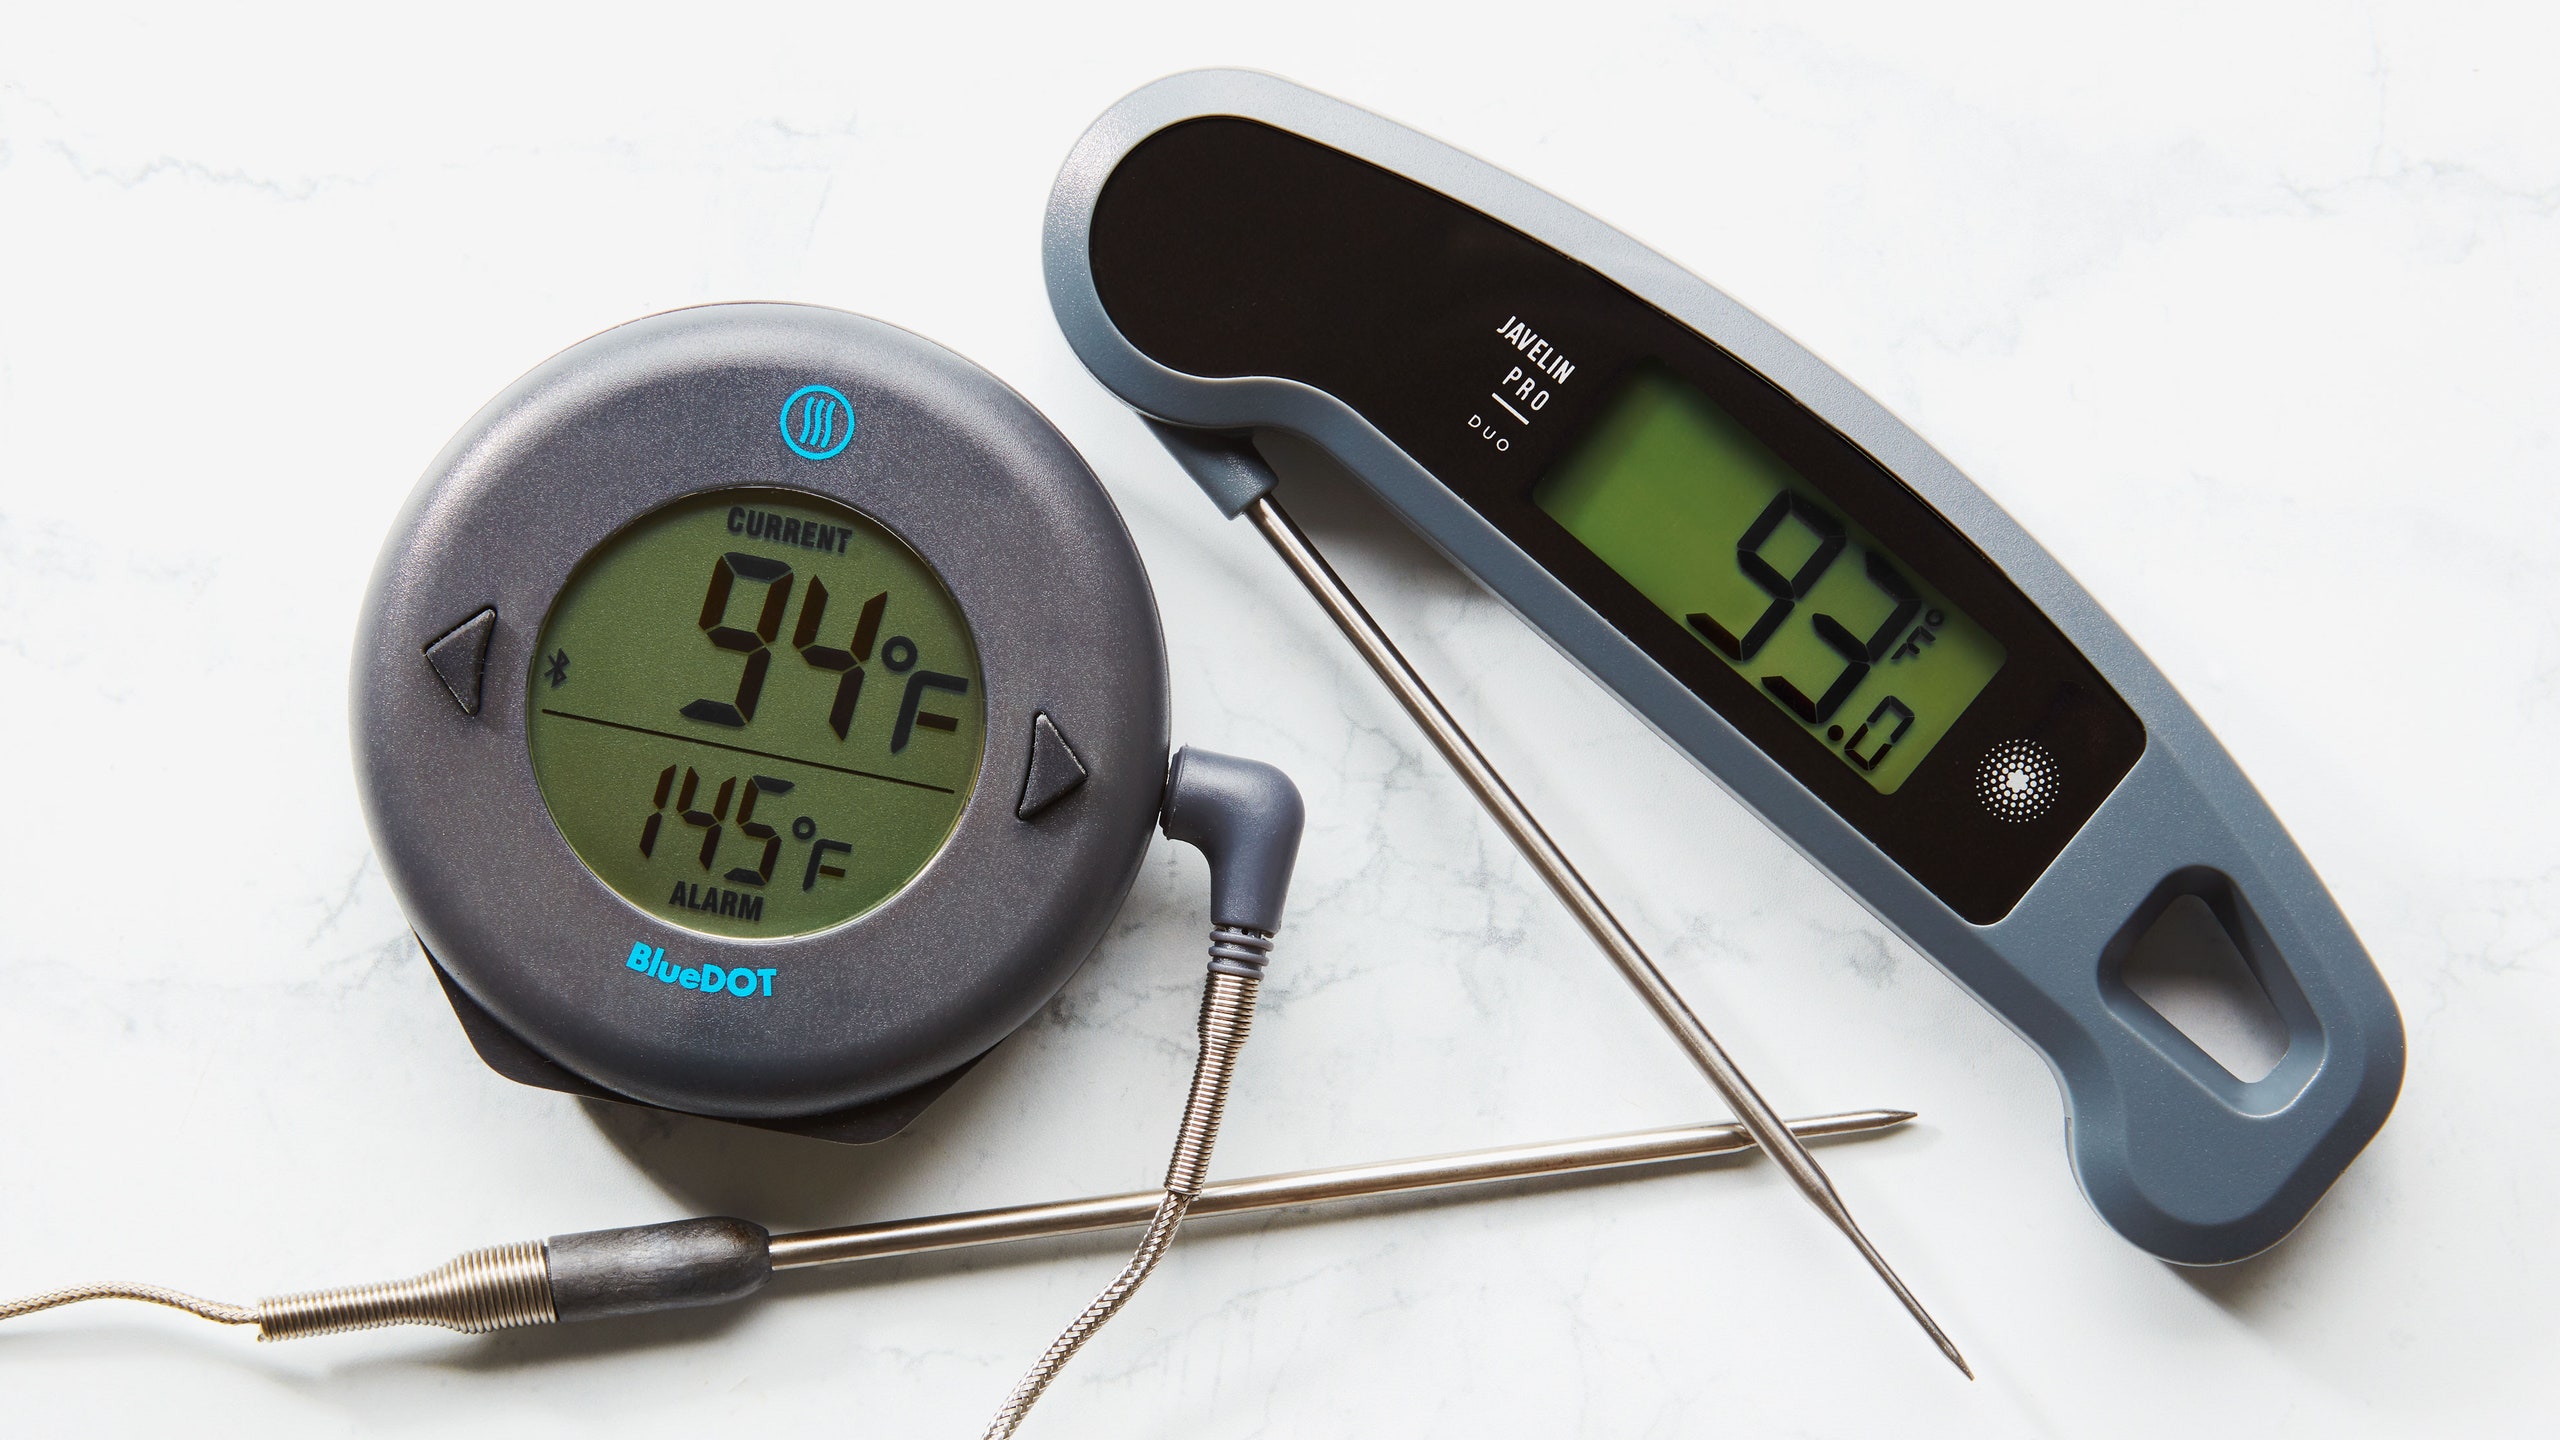 Can You Leave a Meat Thermometer in the Oven